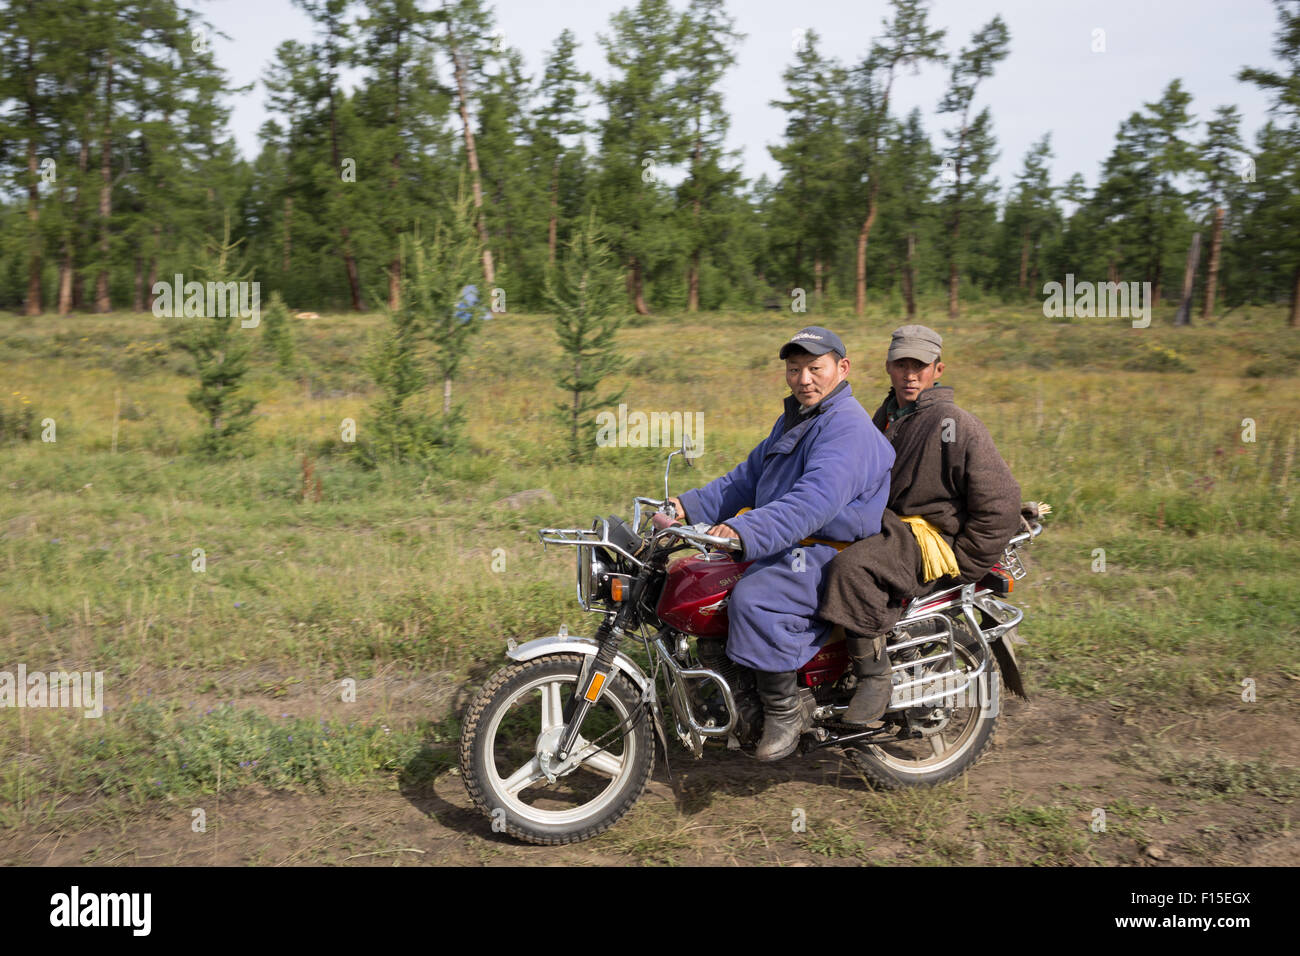 Mongolians on a motorcycle in Northern Mongolia. Stock Photo